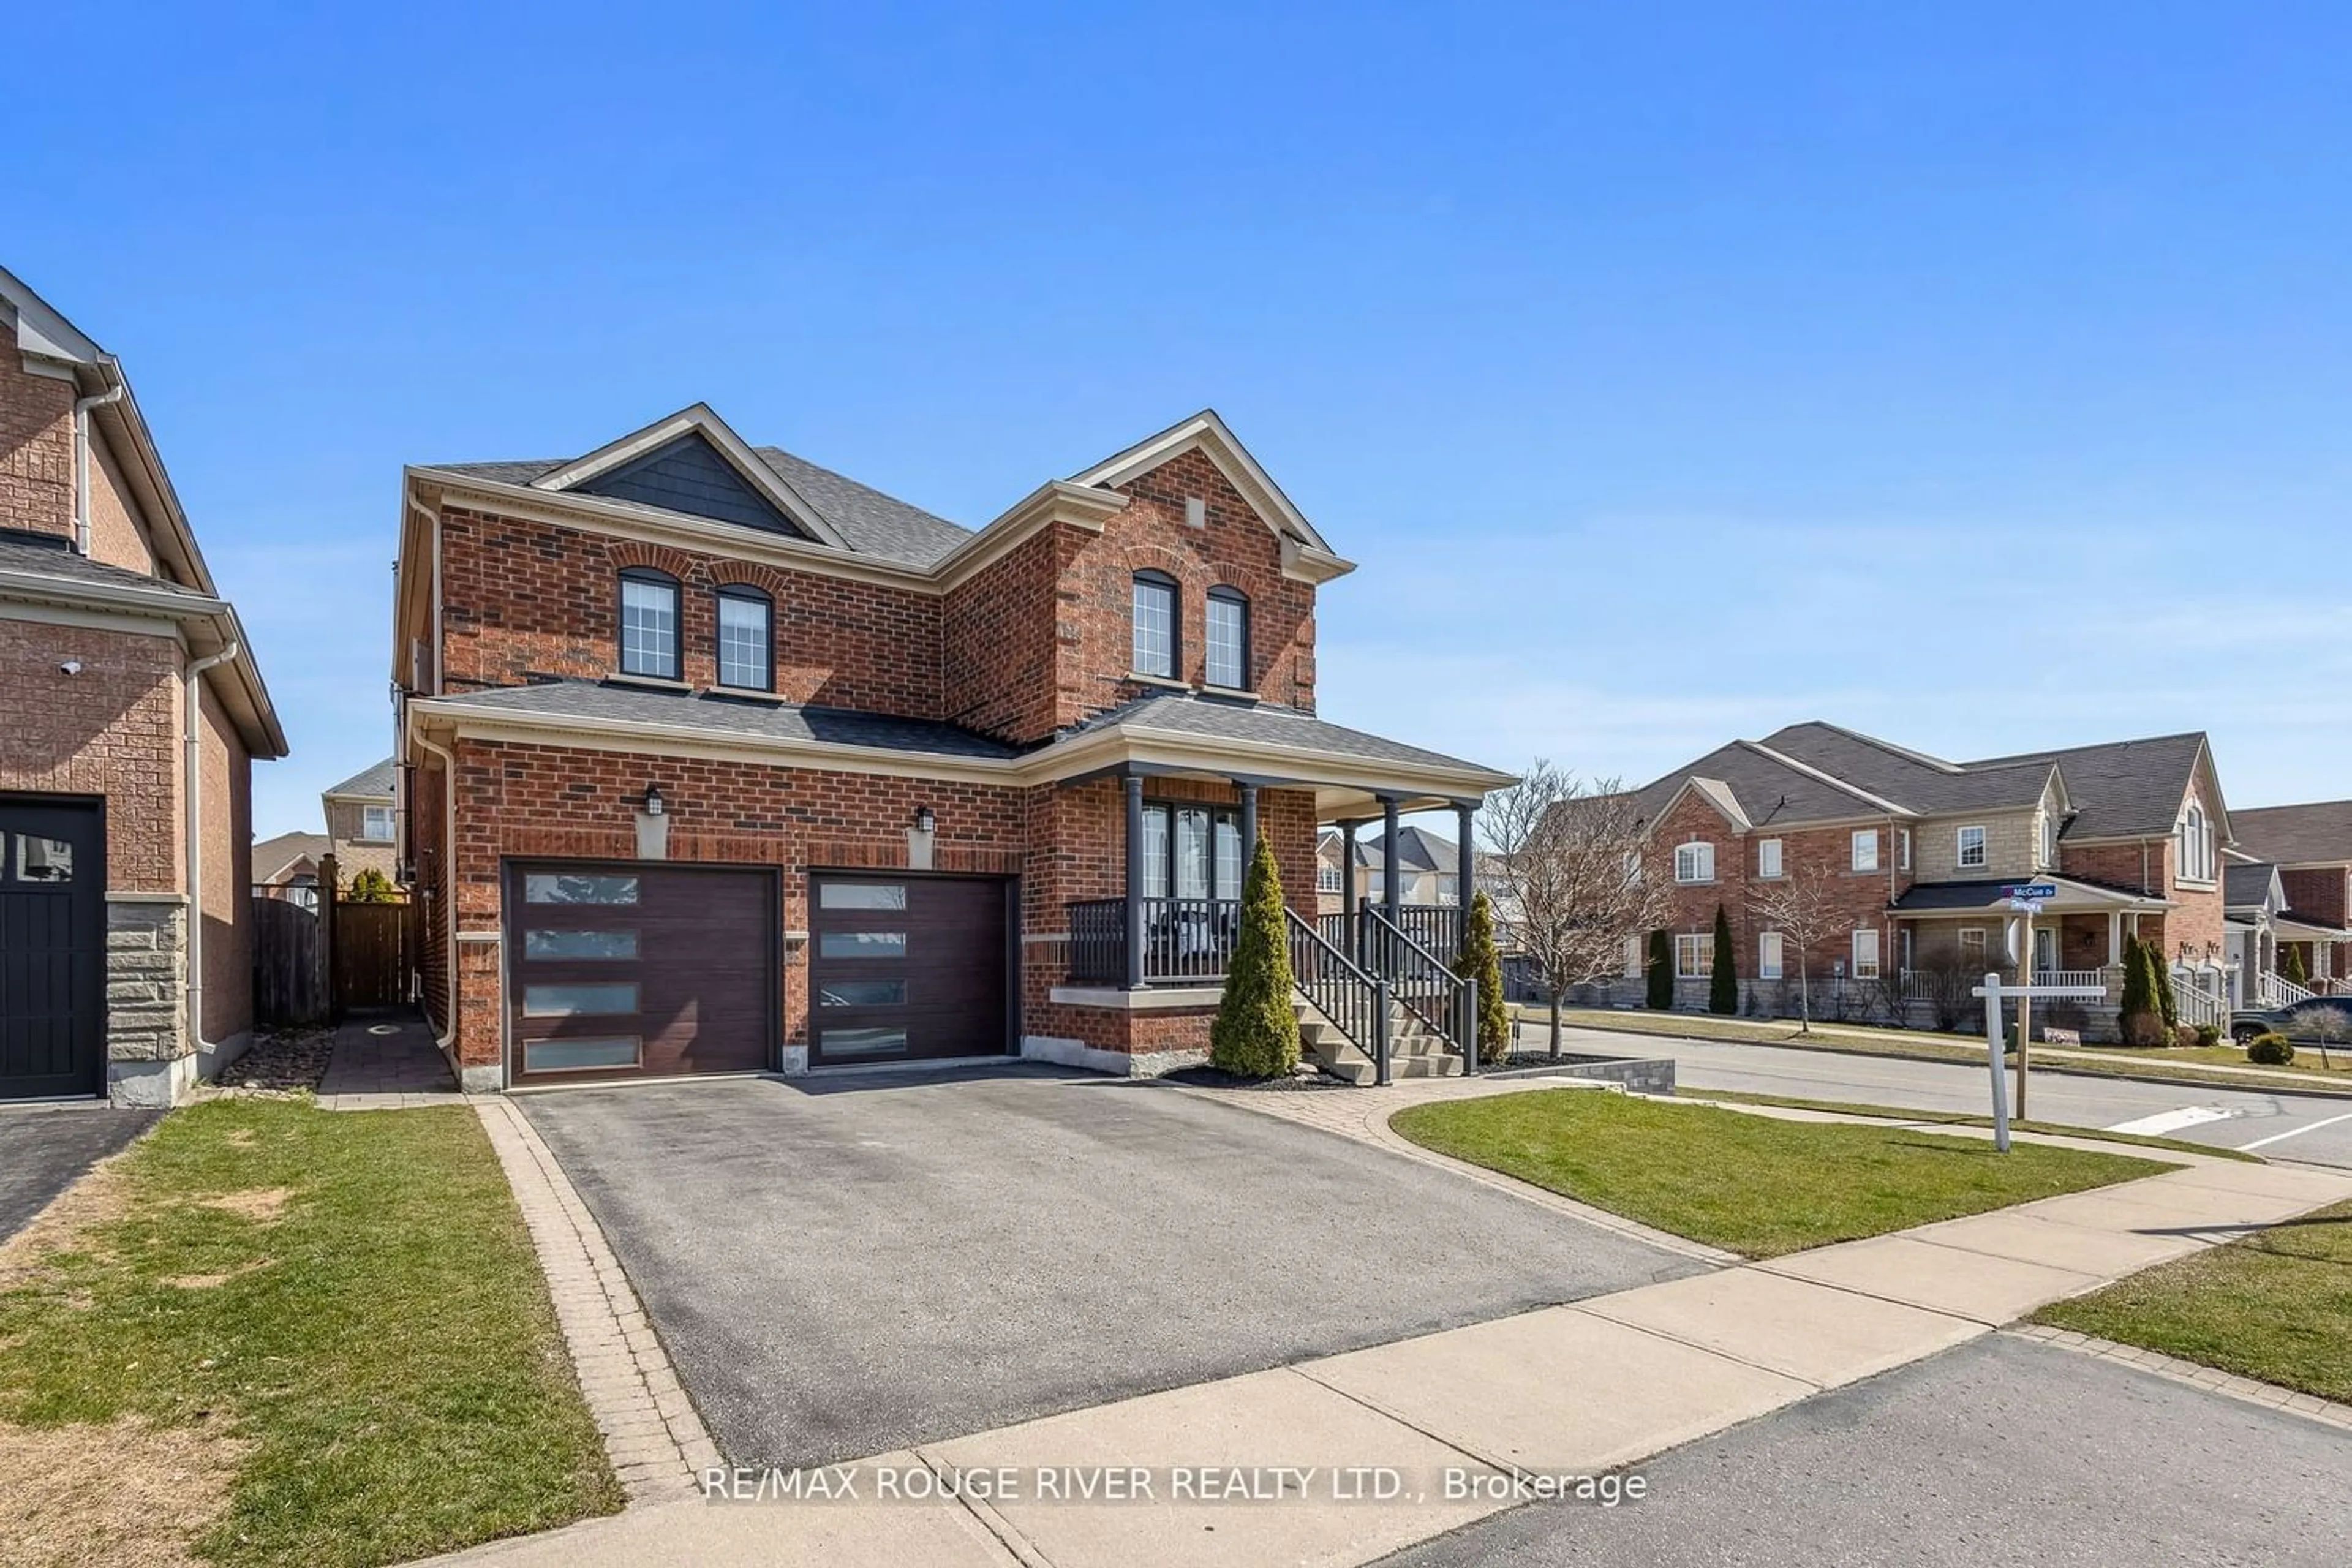 Home with brick exterior material for 1393 Clearbrook Dr, Oshawa Ontario L1K 0G8